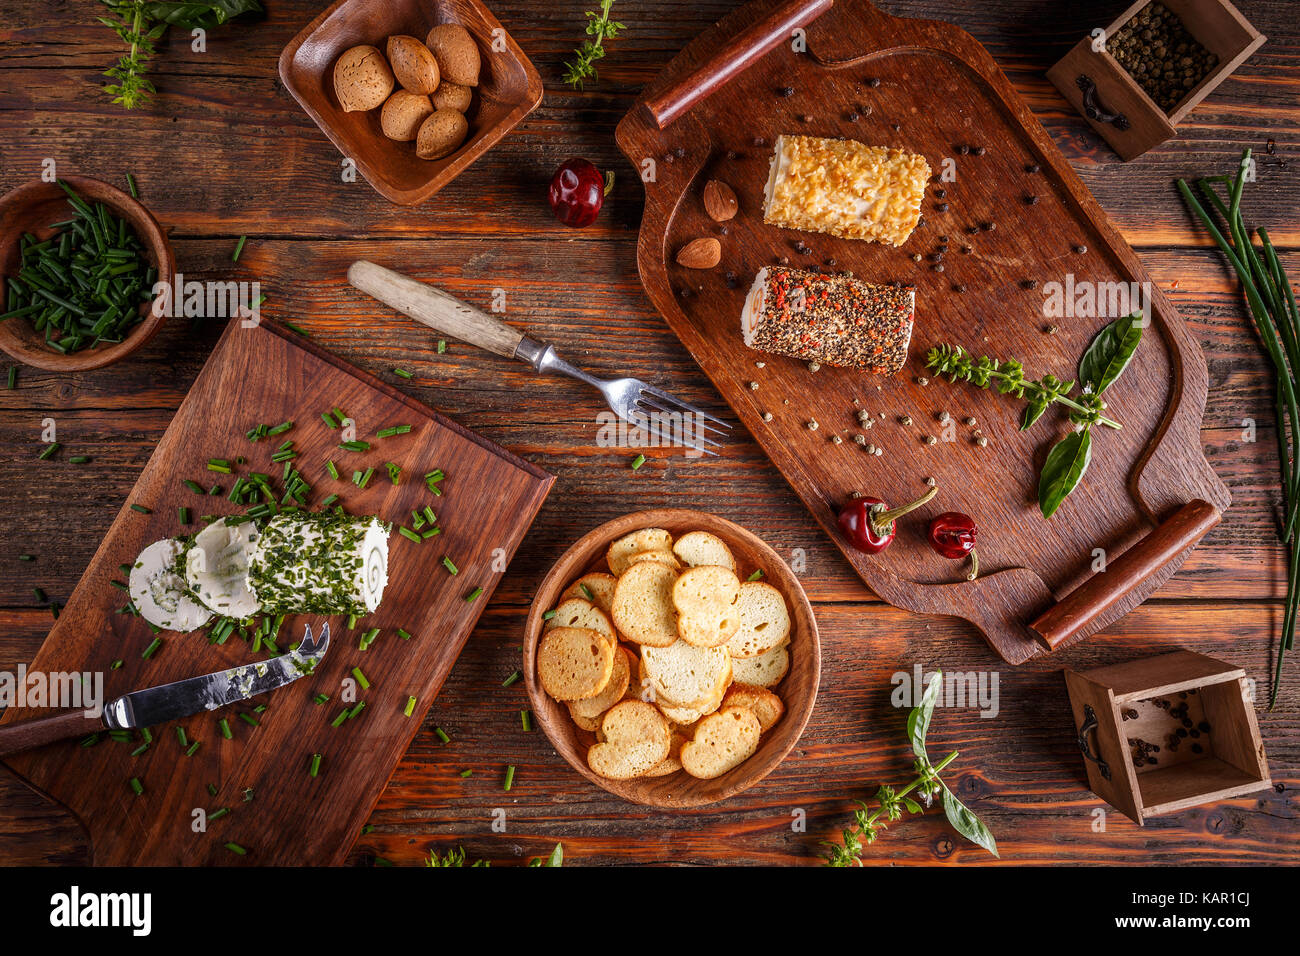 Feta cheese appetizer with spices and herbs Stock Photo